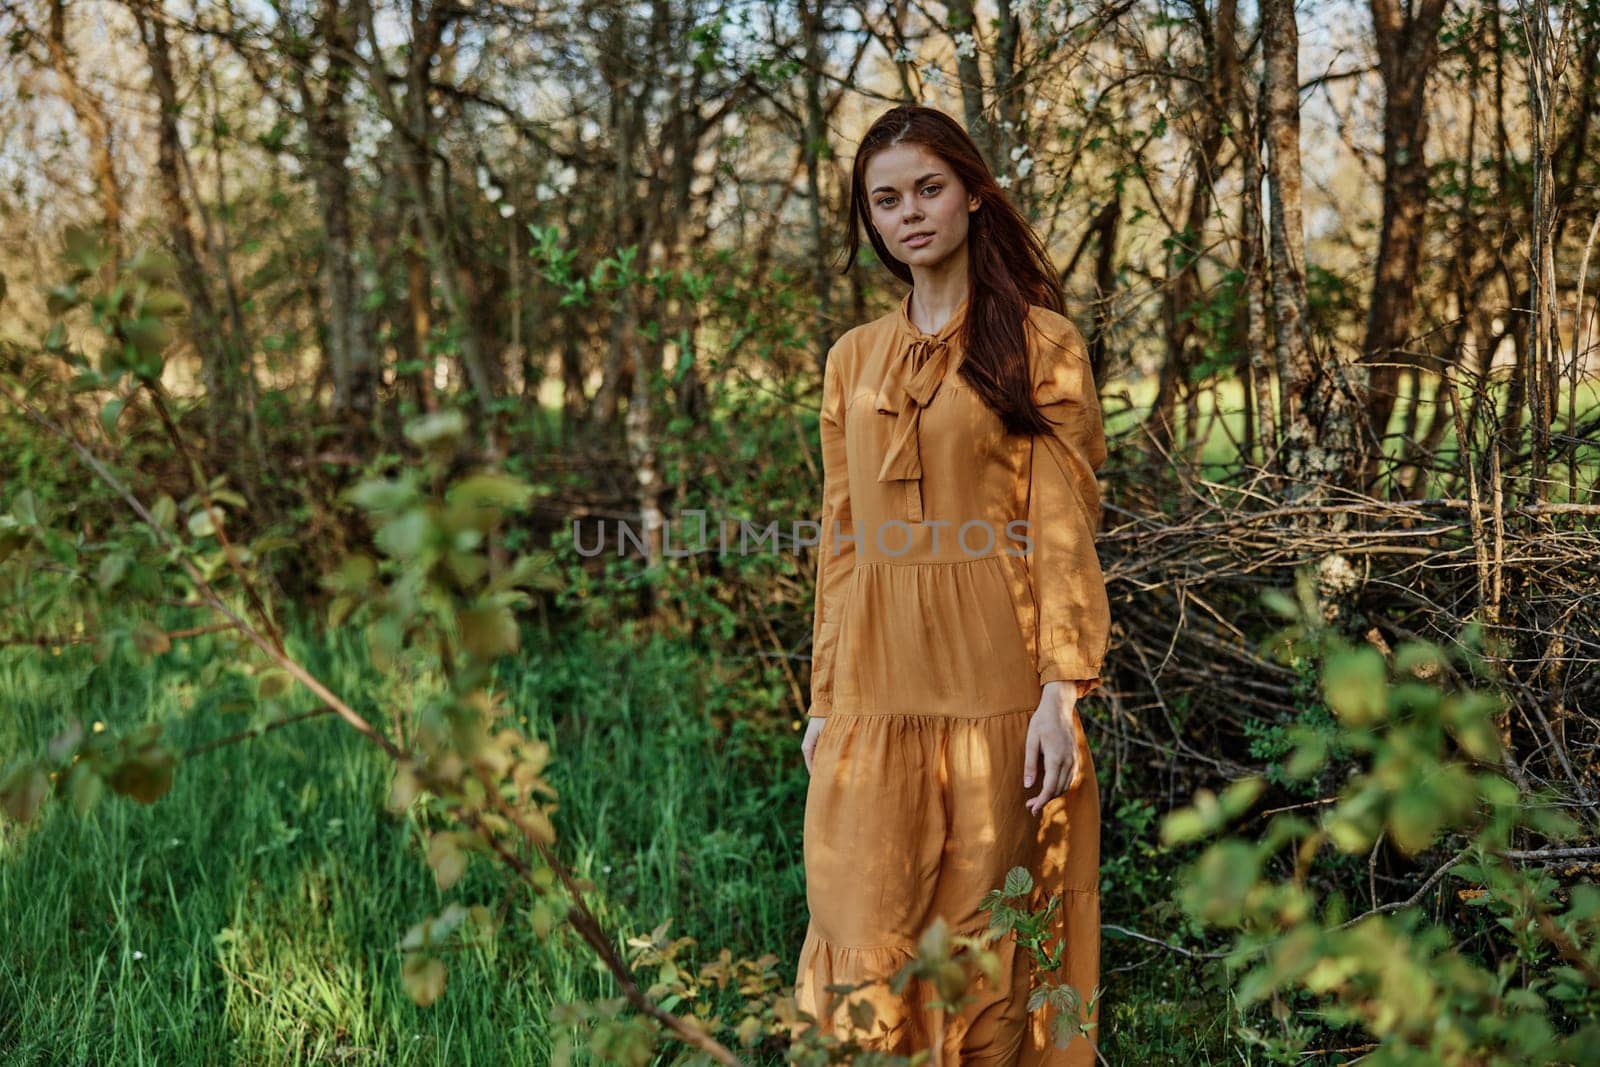 a woman with long hair walks in the shade near the trees, dressed in a long orange dress, enjoying the weather and the weekend, while looking at the camera. The theme of privacy with nature by Vichizh